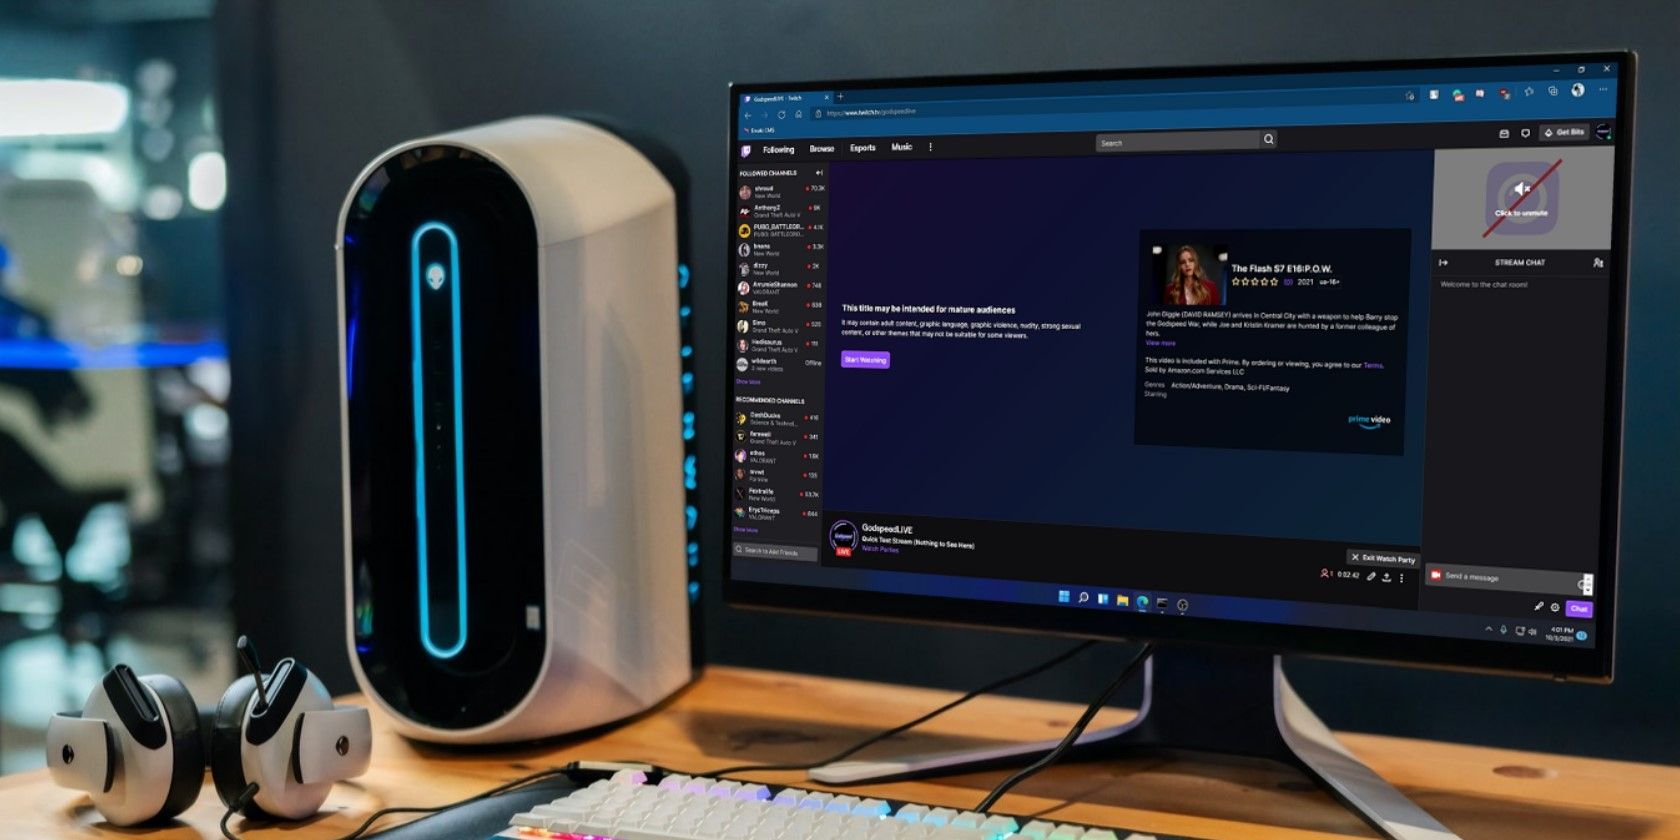 Streaming Twitch Watch Party on a PC